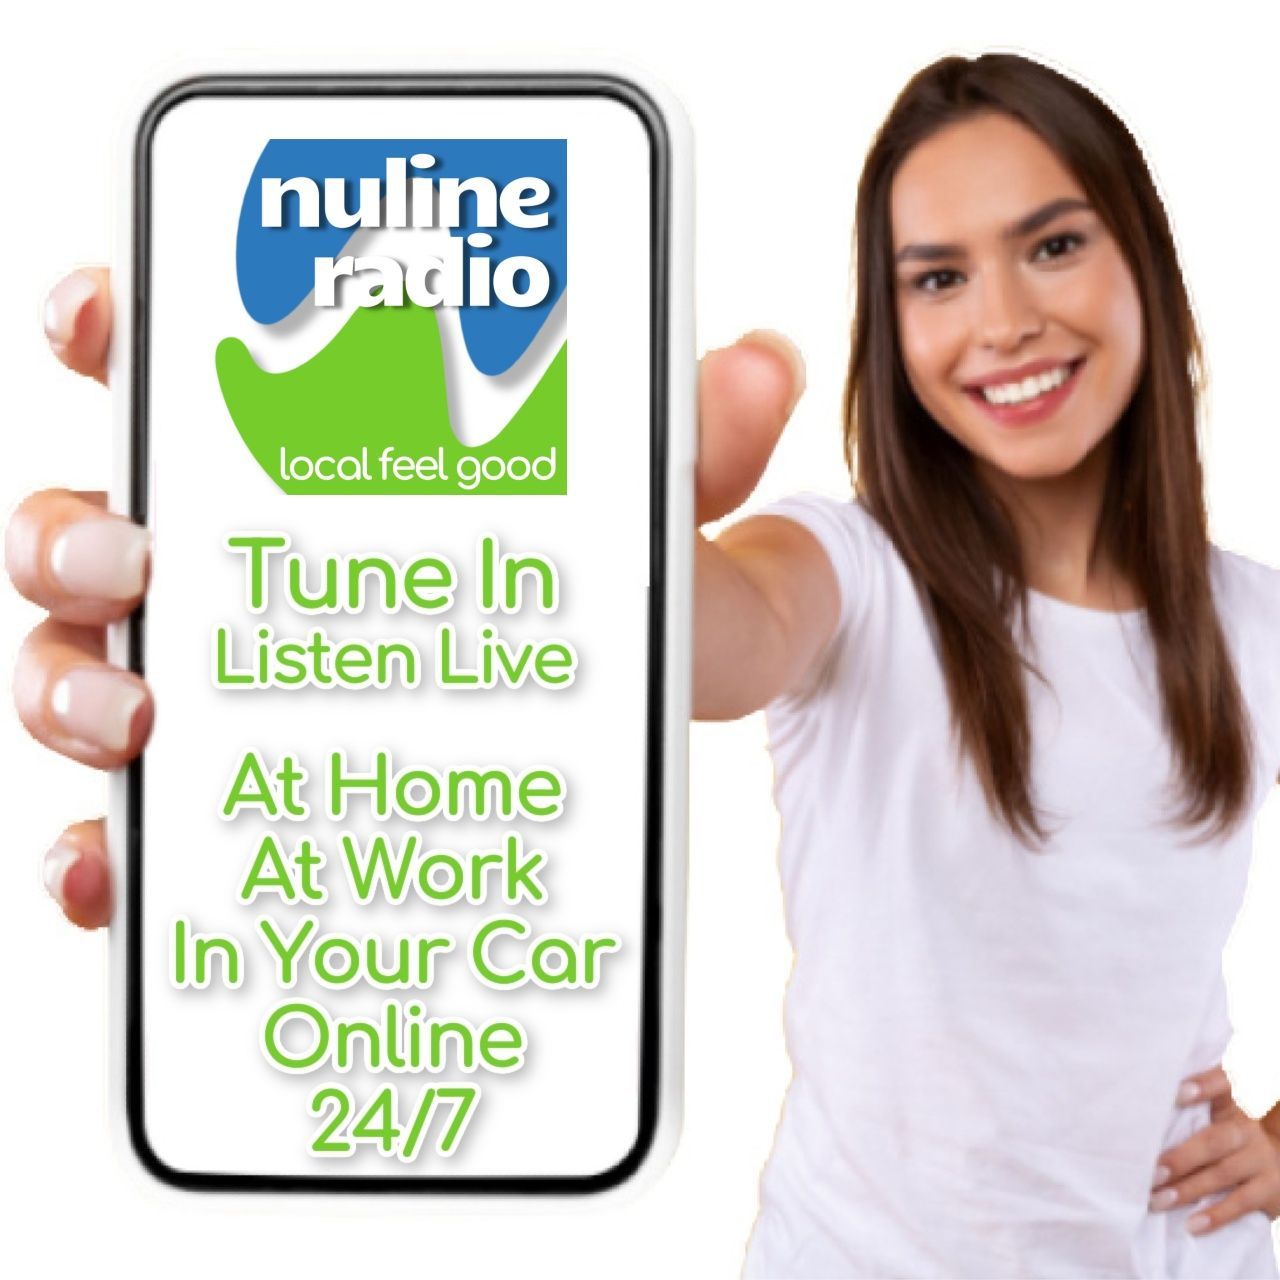 nuline_radio_mobile_app_music_and_local_information_in_the_palm_of_your_hand